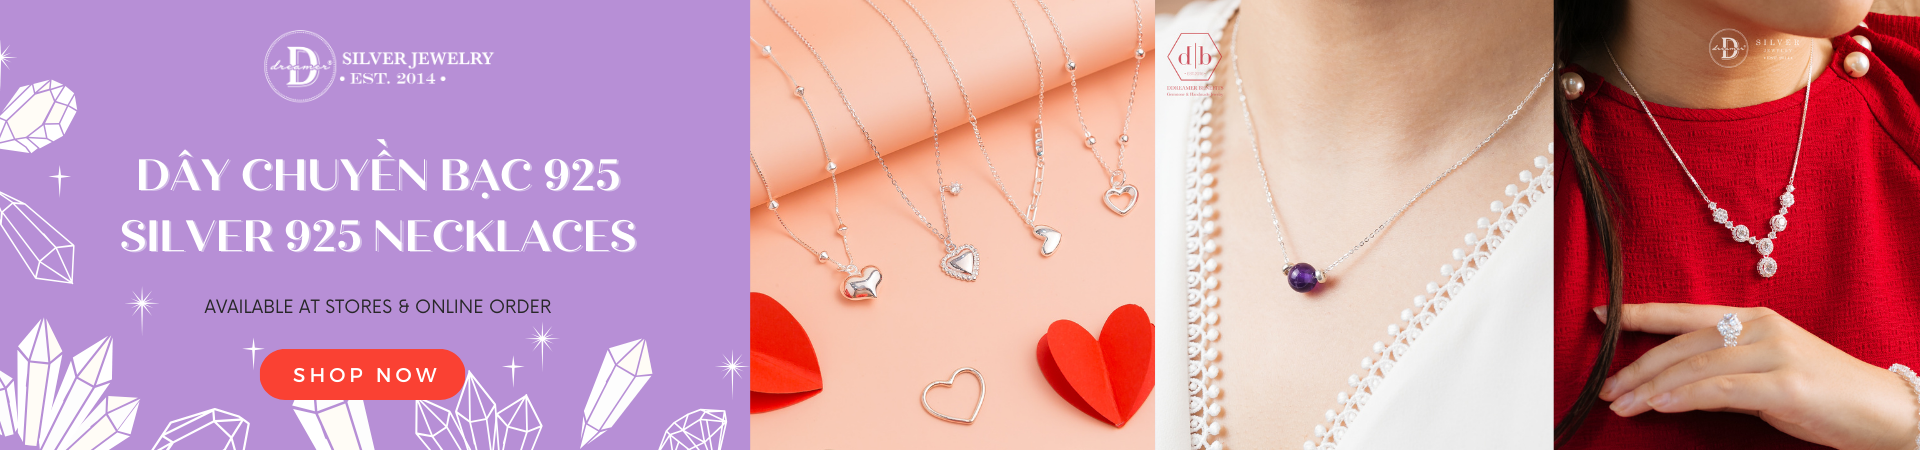 Tất Cả Dây Chuyền Bạc 925 - All Silver Necklace Collection